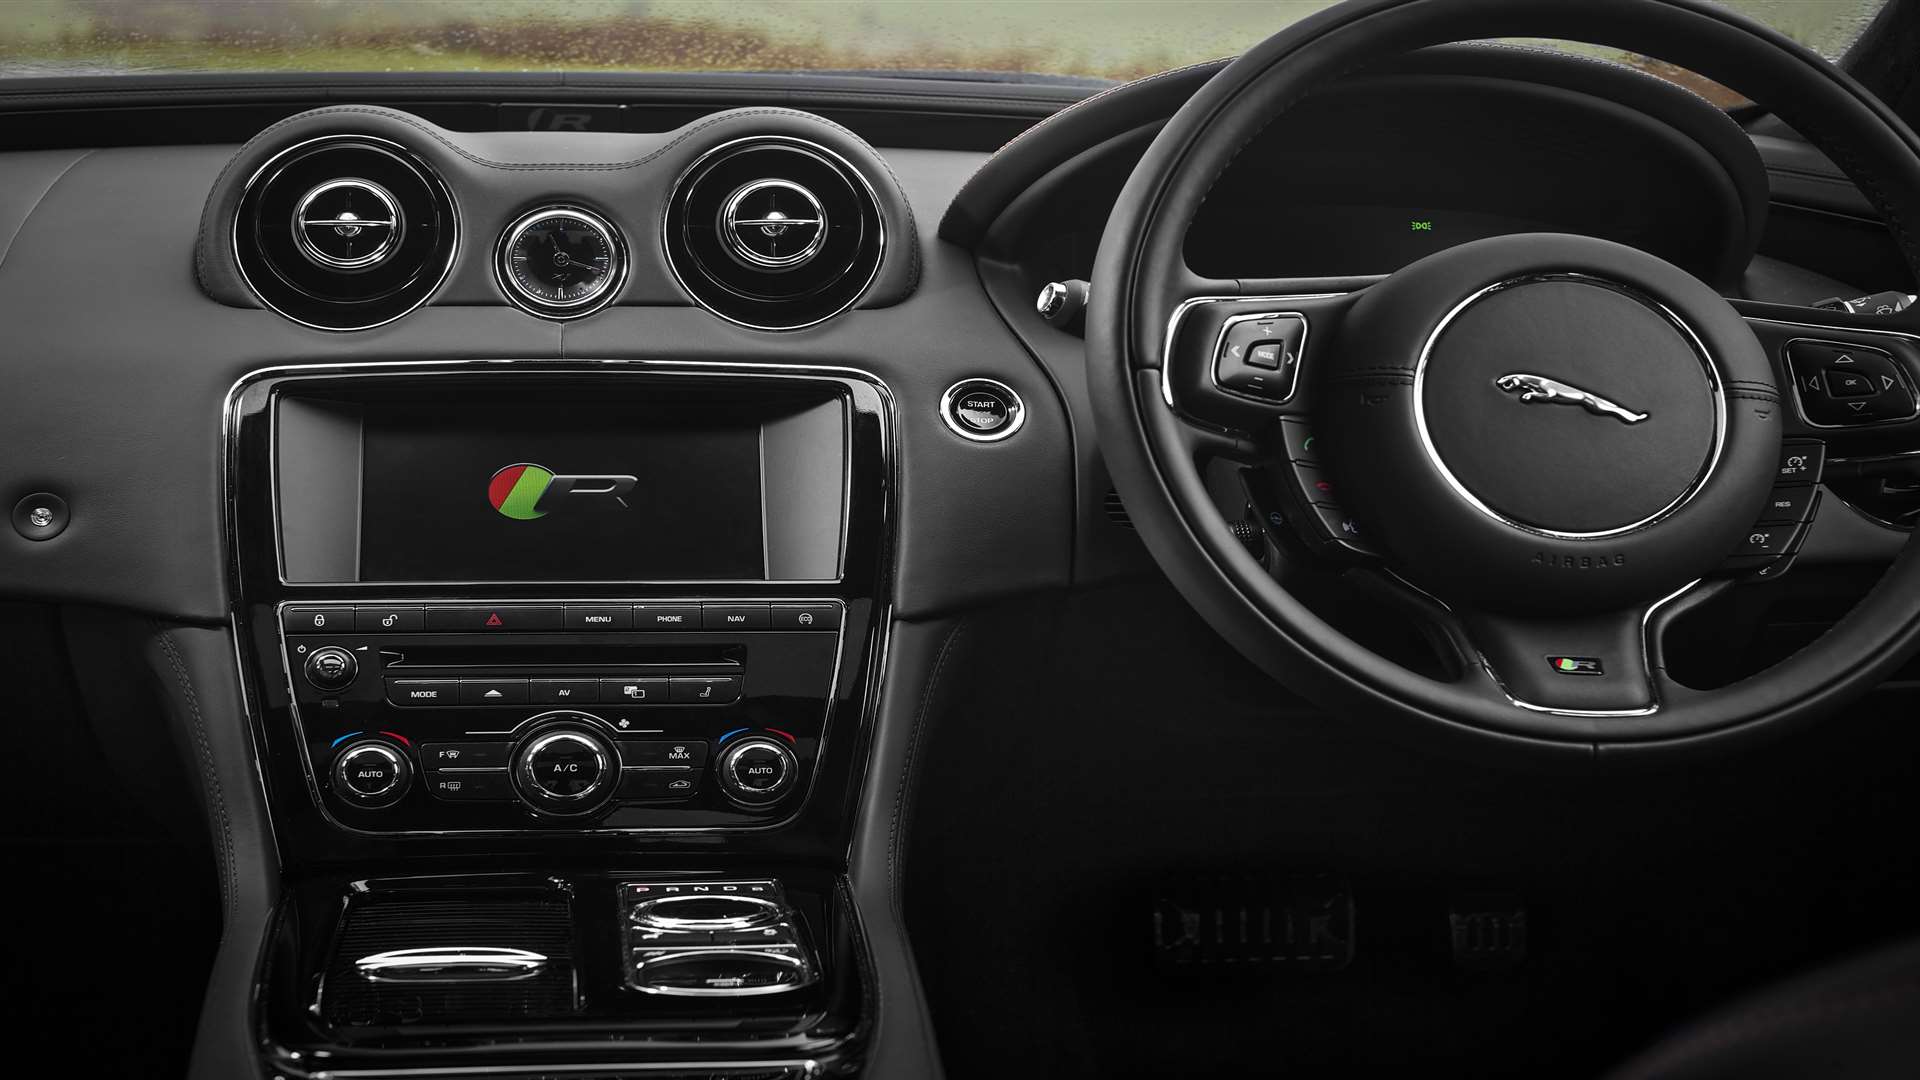 The luxurious interior is let down a little by the low-res touchscreen